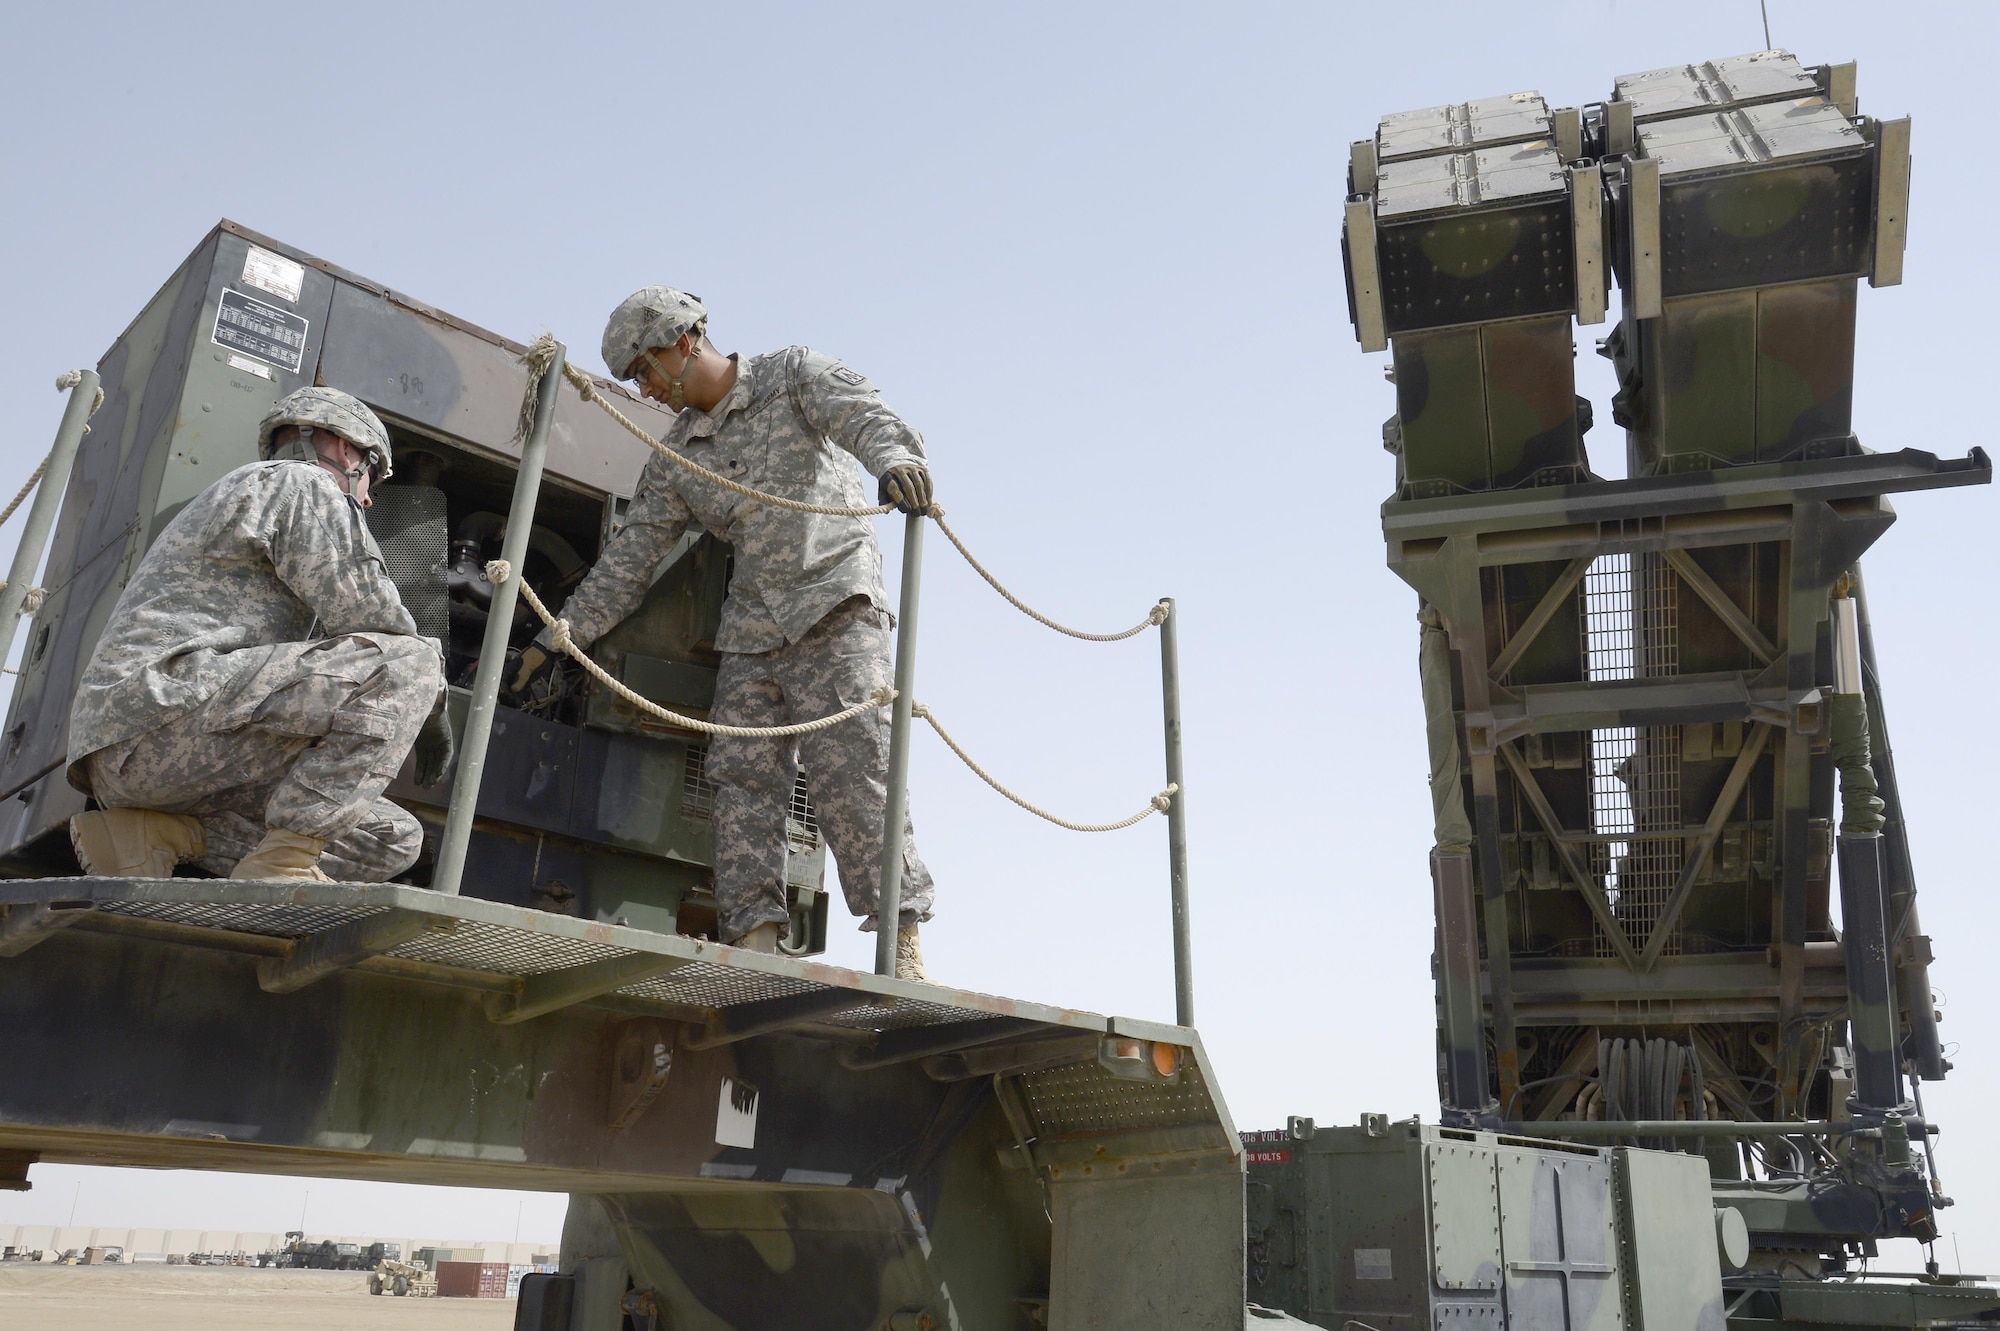 U.S. Army Specialist Cody, right, launching station control member, teaches U.S. Army Private First Class Joshua, tactical control assistant, how to conduct preventative maintenance checks on a launcher station at an undisclosed location in Southwest Asia March 18, 2015. The Bravo Battery mission is to neutralize theatre ballistic missile and aerial attacks against our defended assets in support of the combatant commander’s strategic objectives to allow U.S. coalition forces freedom of maneuver. (U.S. Air Force photo/Tech. Sgt. Marie Brown/RELEASED)